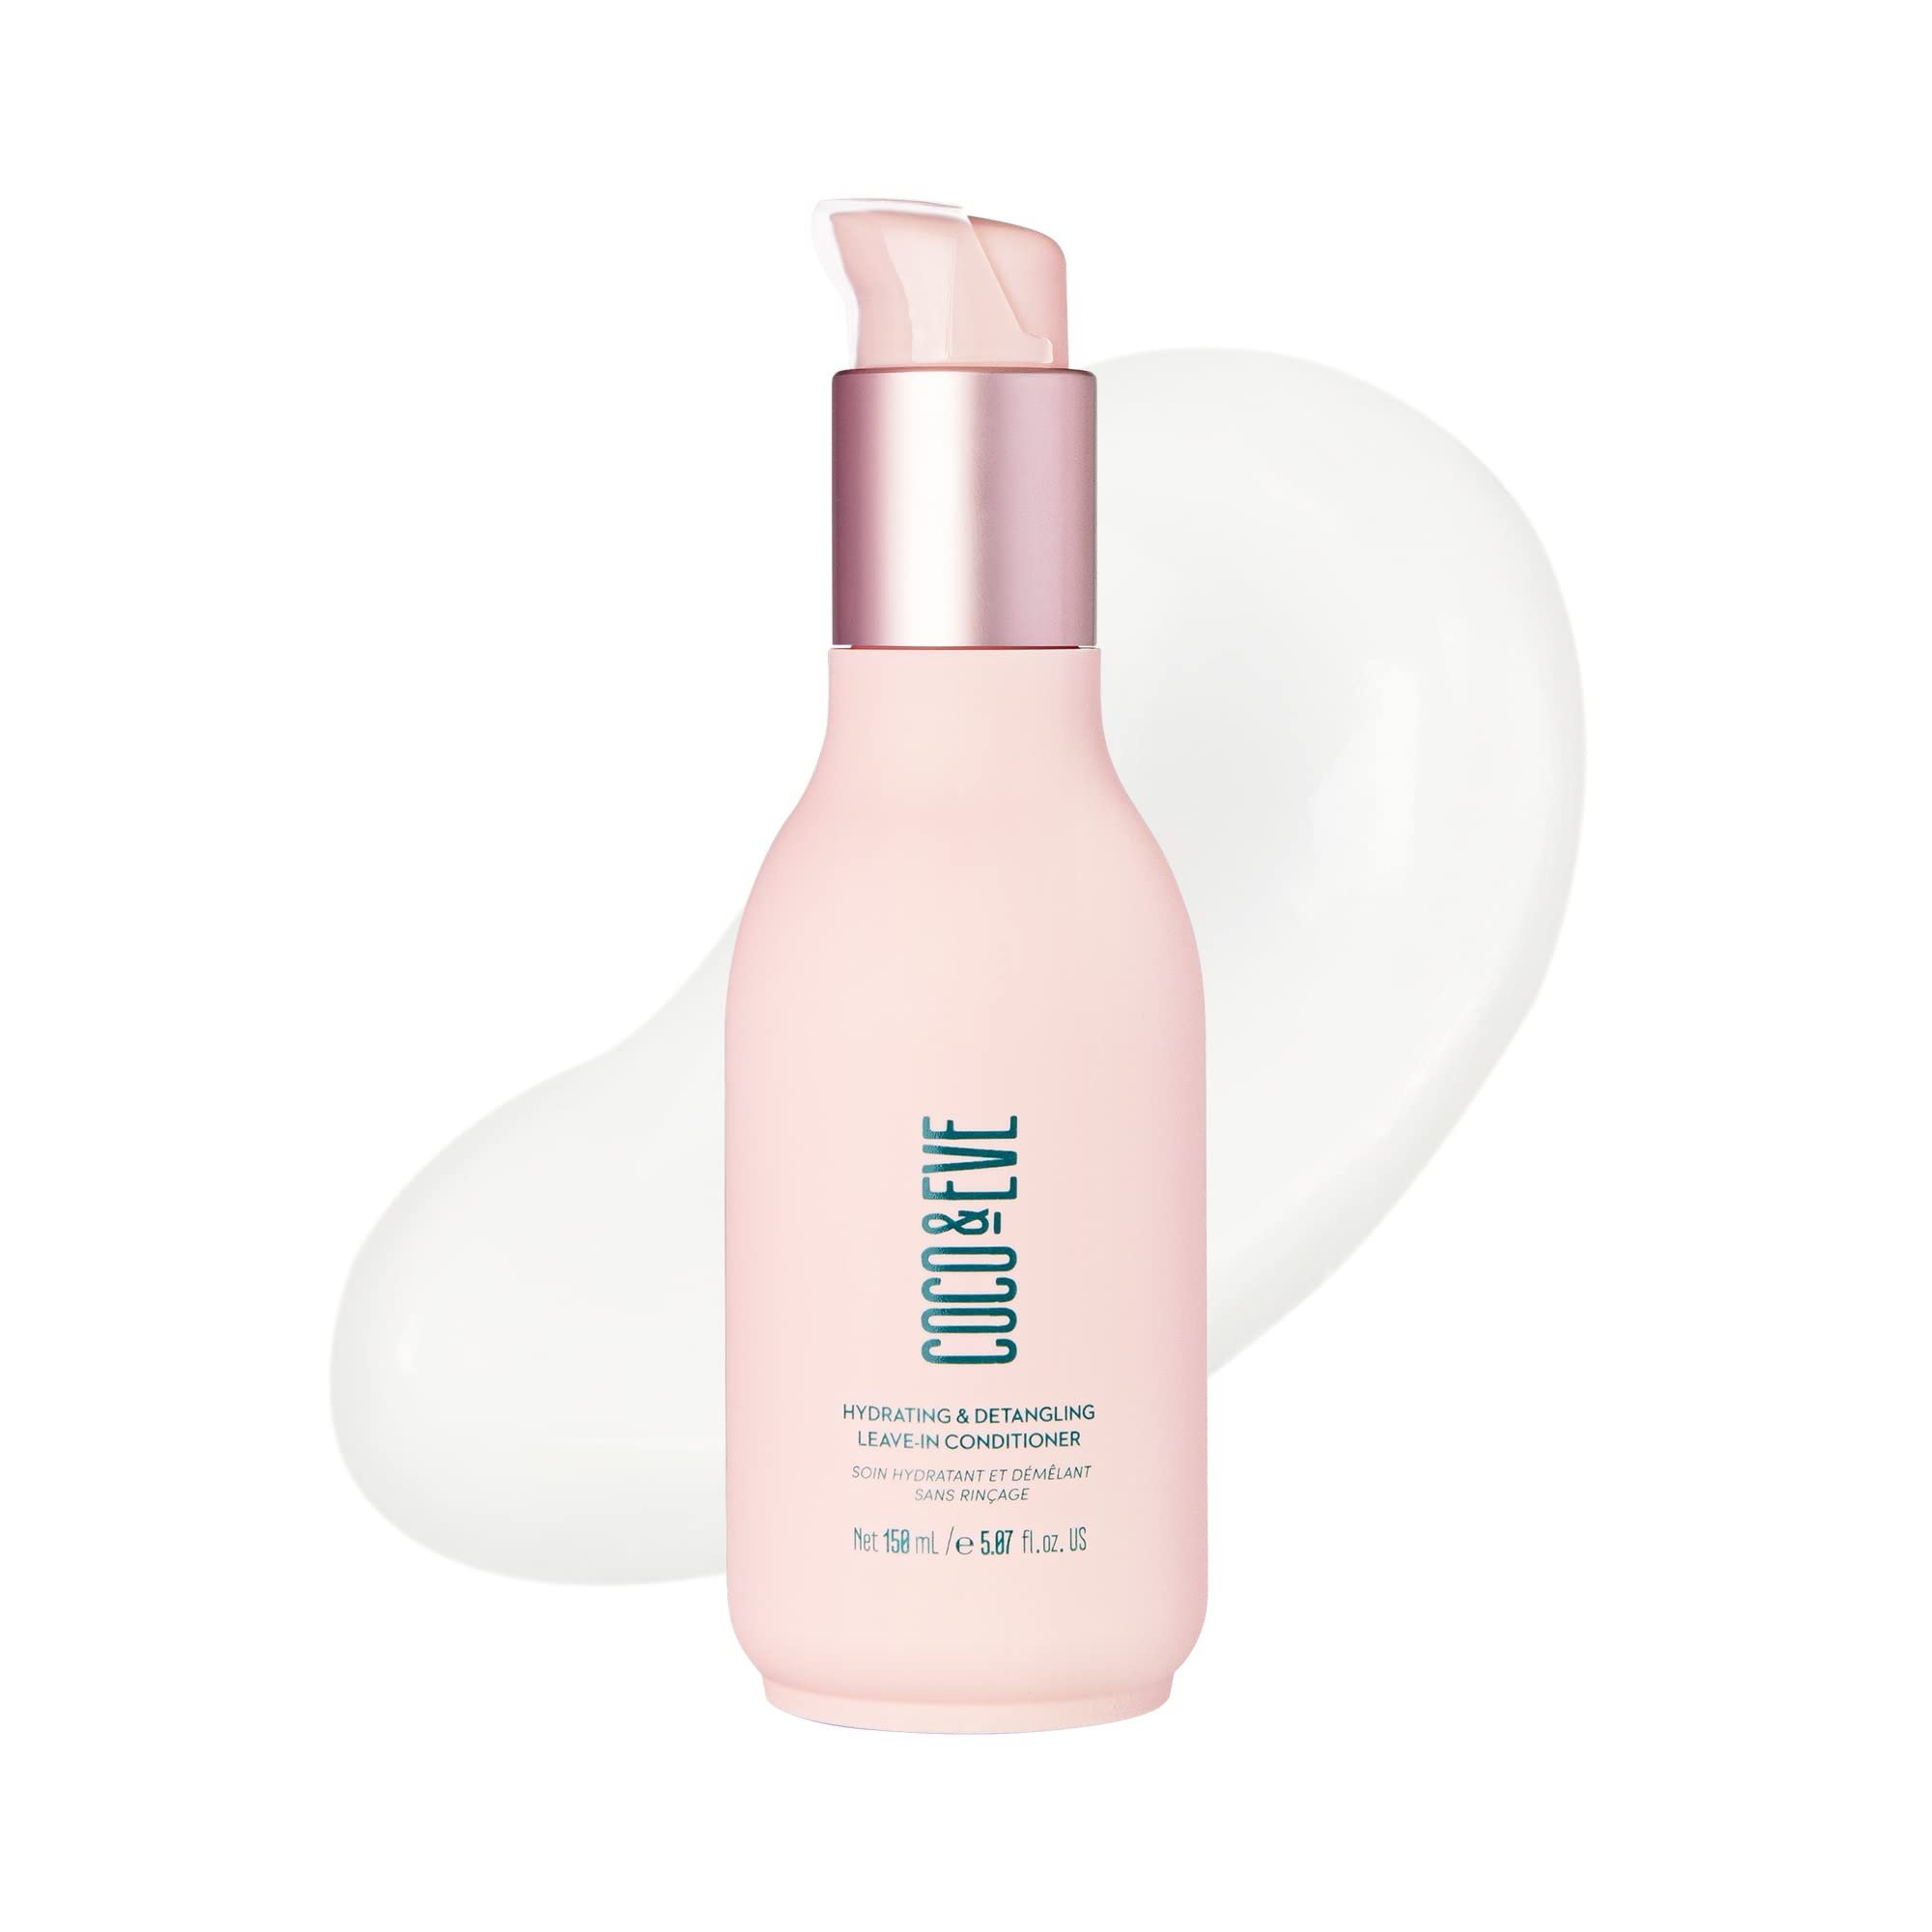 Coco & Eve Like a Virgin Leave in Conditioner